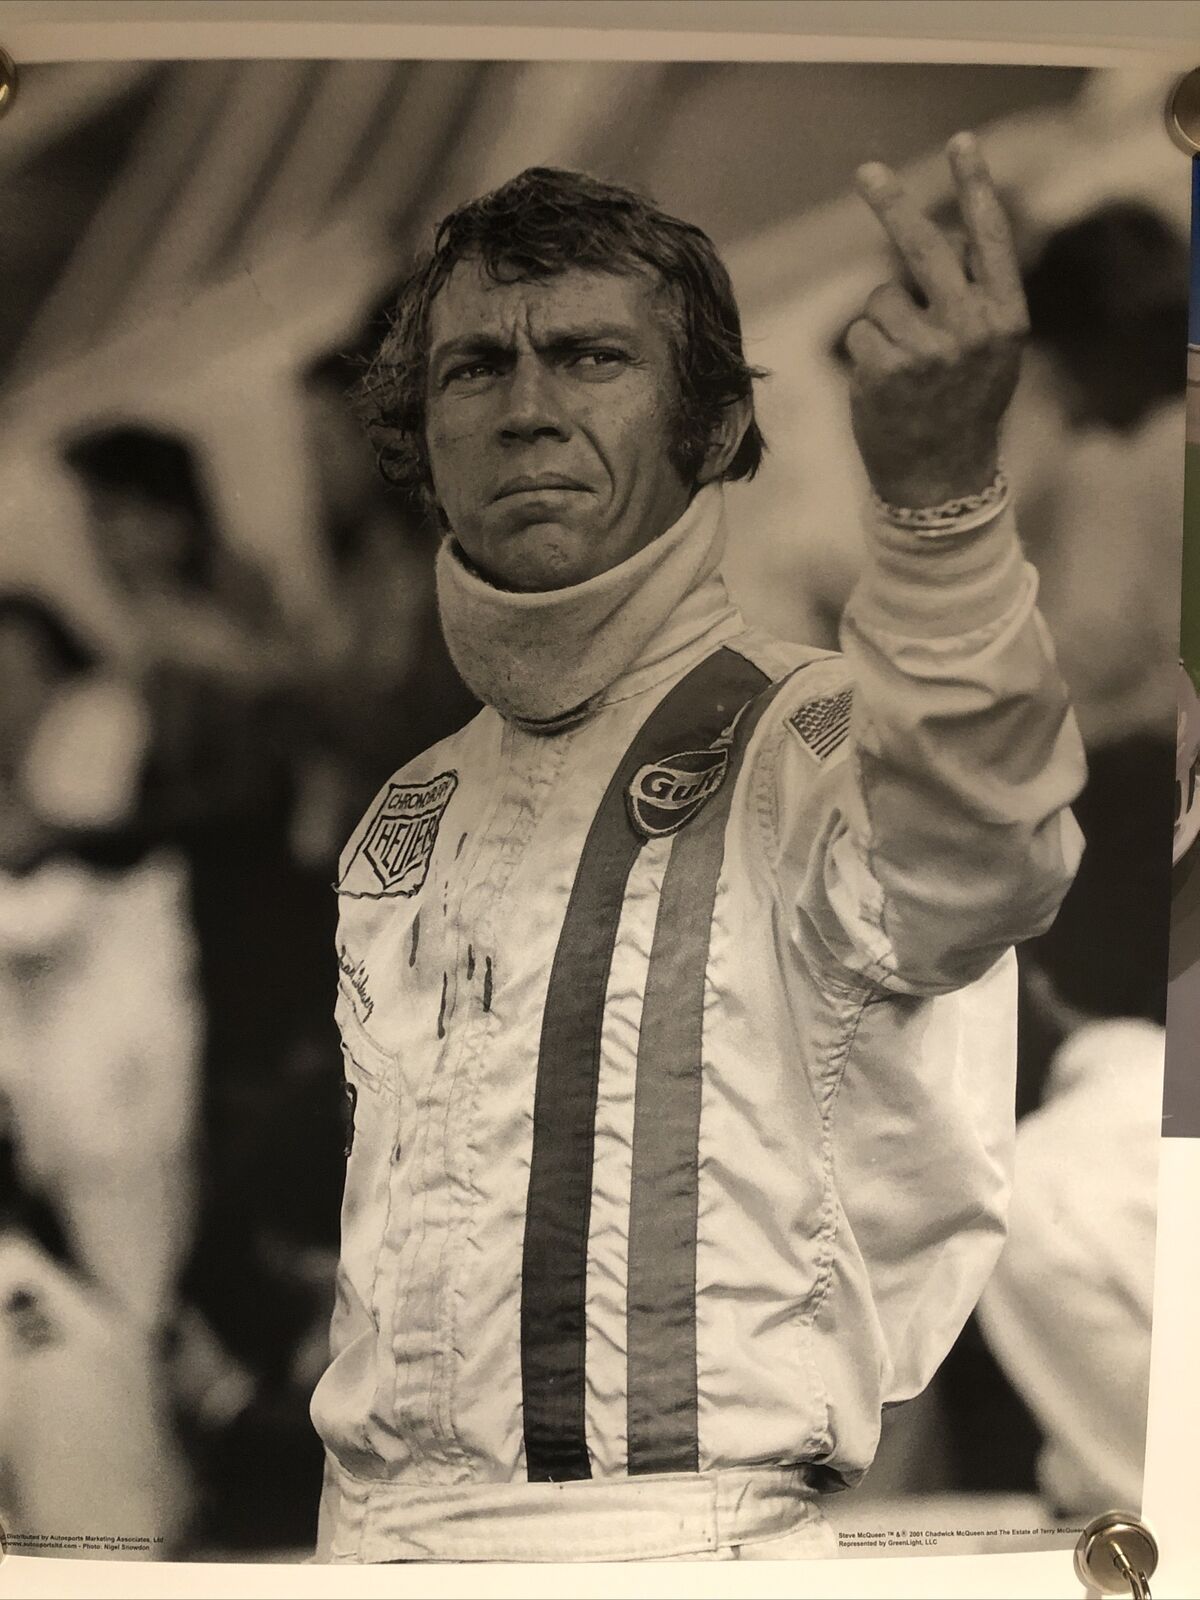 AWESOME Steve McQueen Porsche poster two fingers up Gulf Racing team